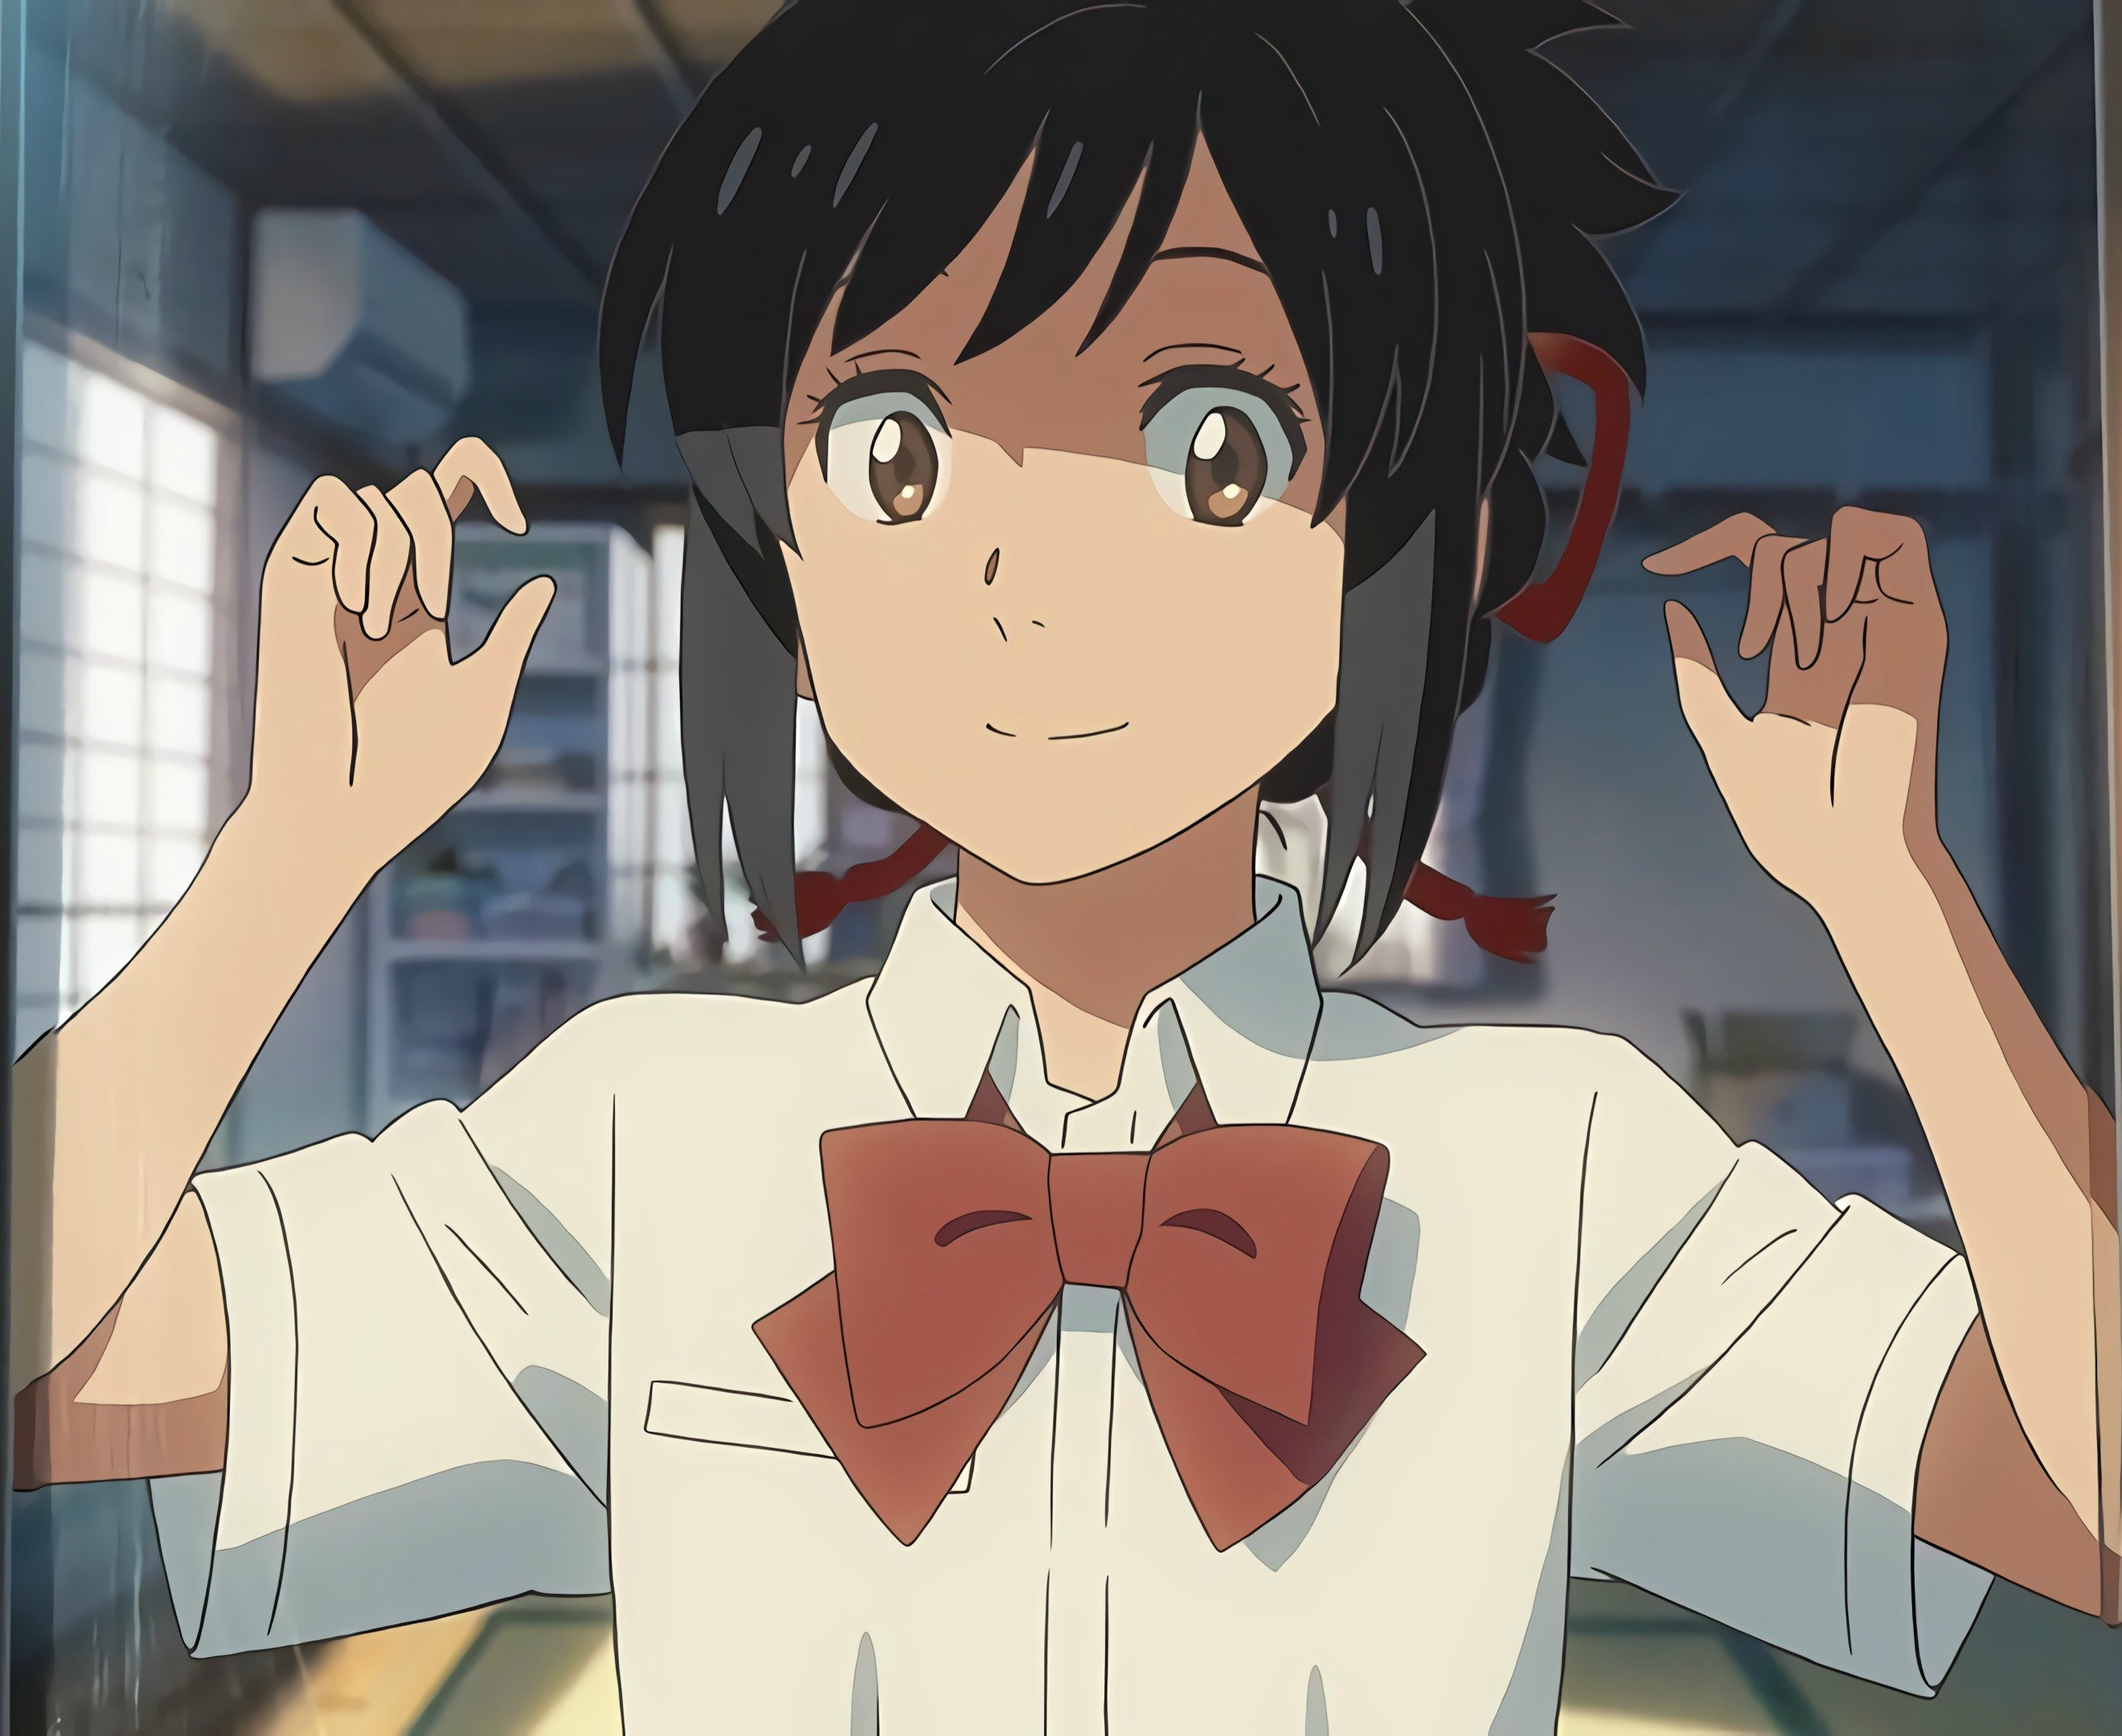 Your Name' Director's New Anime Has A Girl Romancing A Chair